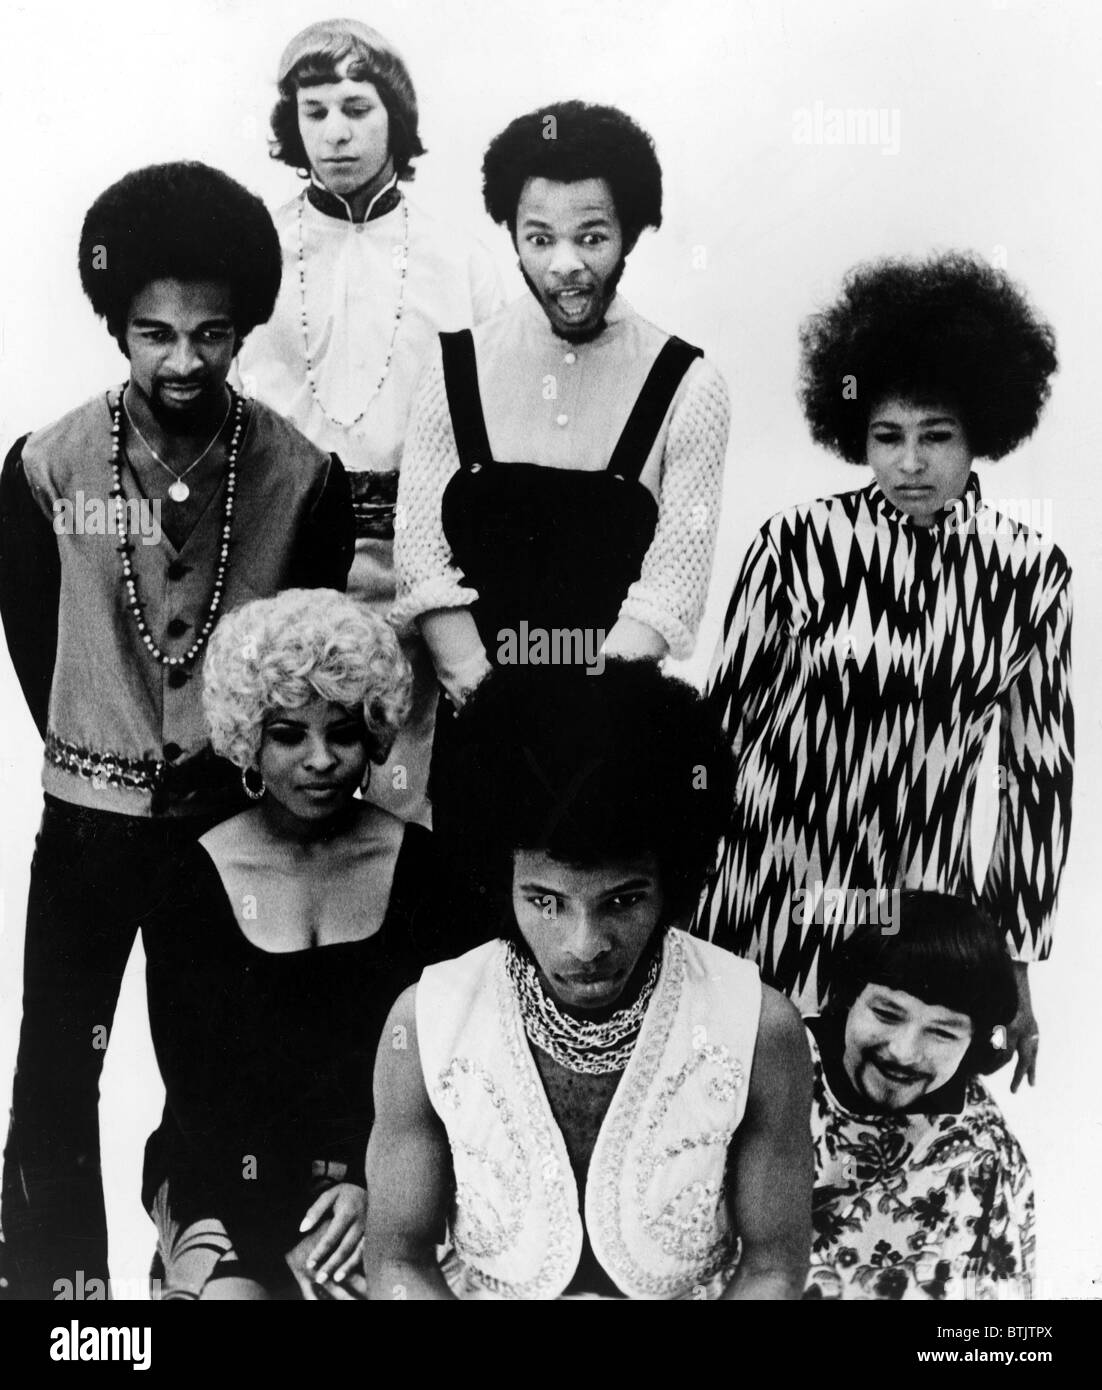 SLY AND THE FAMILY STONE, c. 1970. Stock Photo